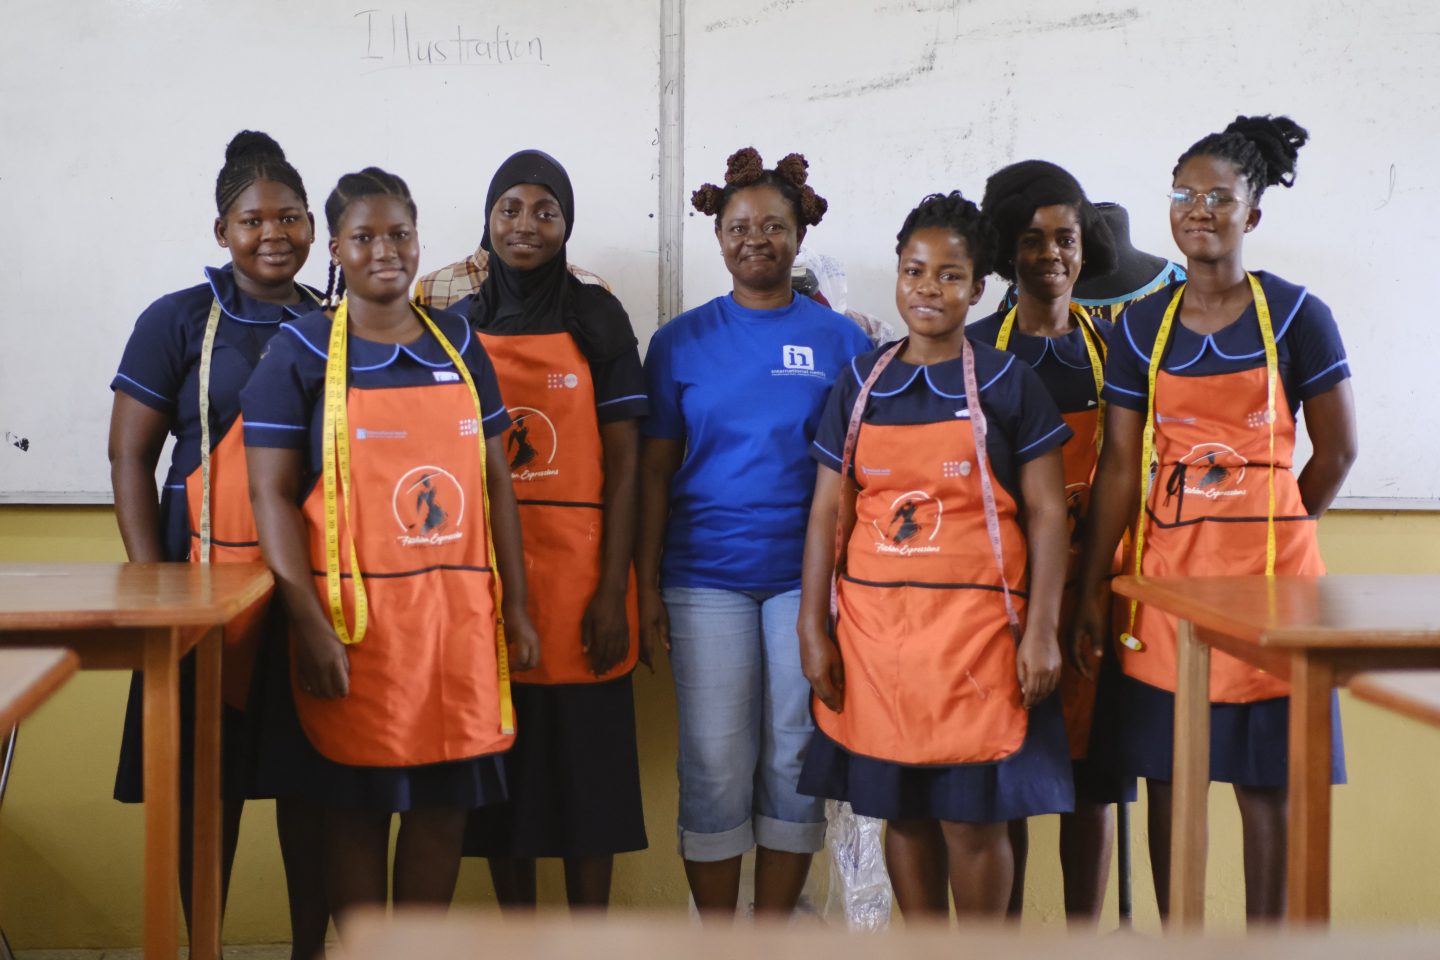 Partnership between Prada and the UN for the training of women in Ghana and Kenya